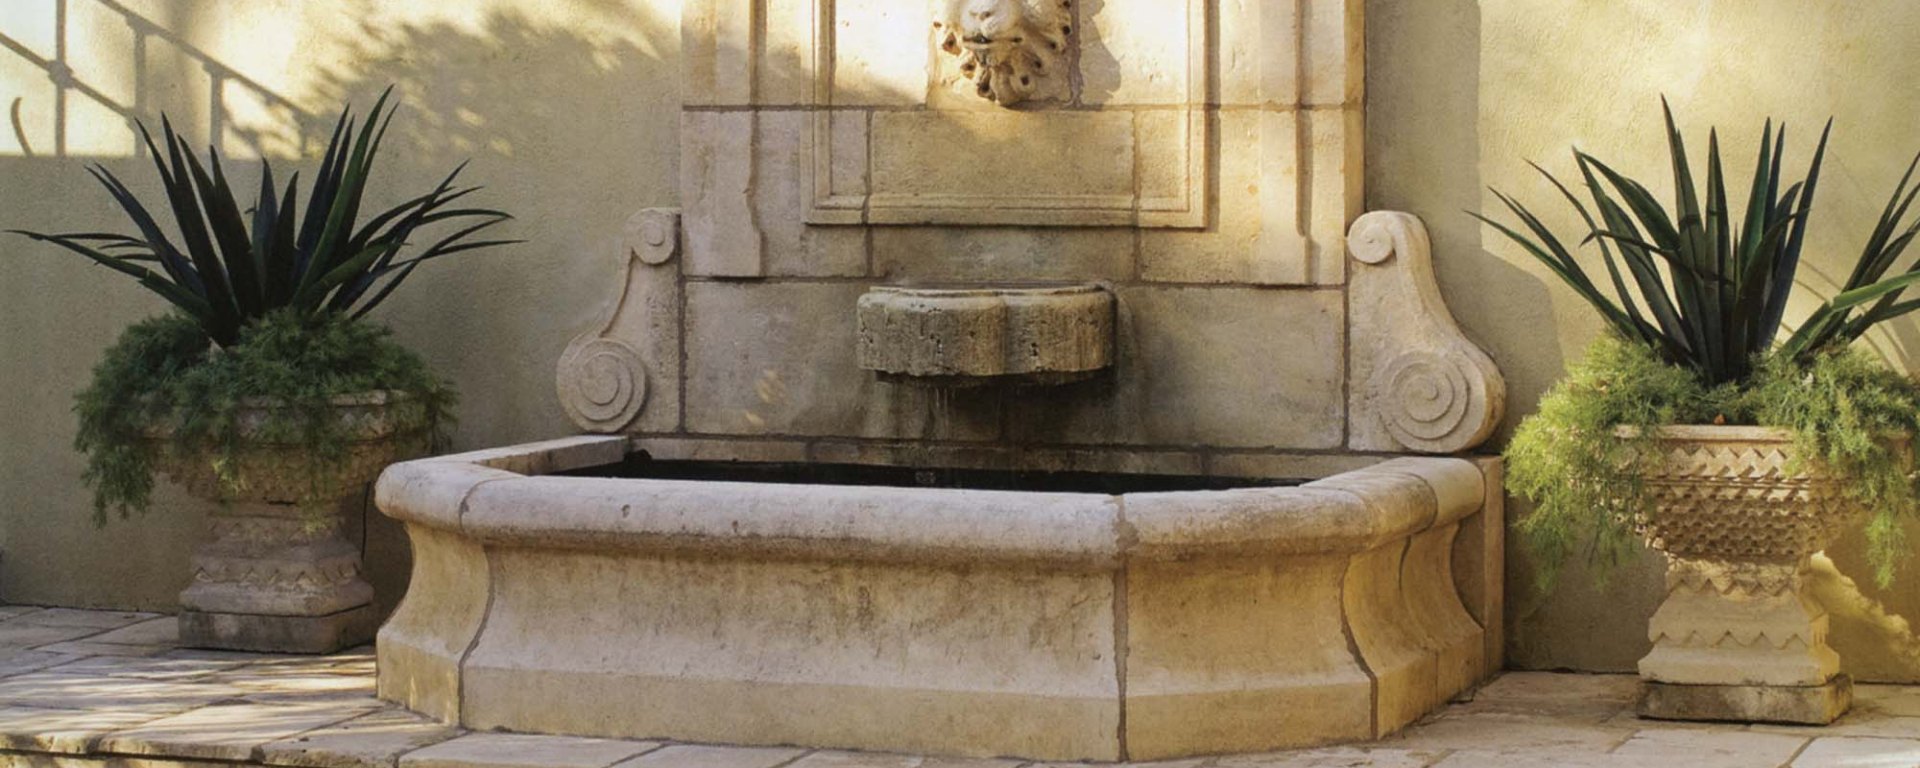 Tuscan antique old rustic reclaimed old world natural stone hand carved limestone exterior outdoor water wall fountain garden design ideas landscape